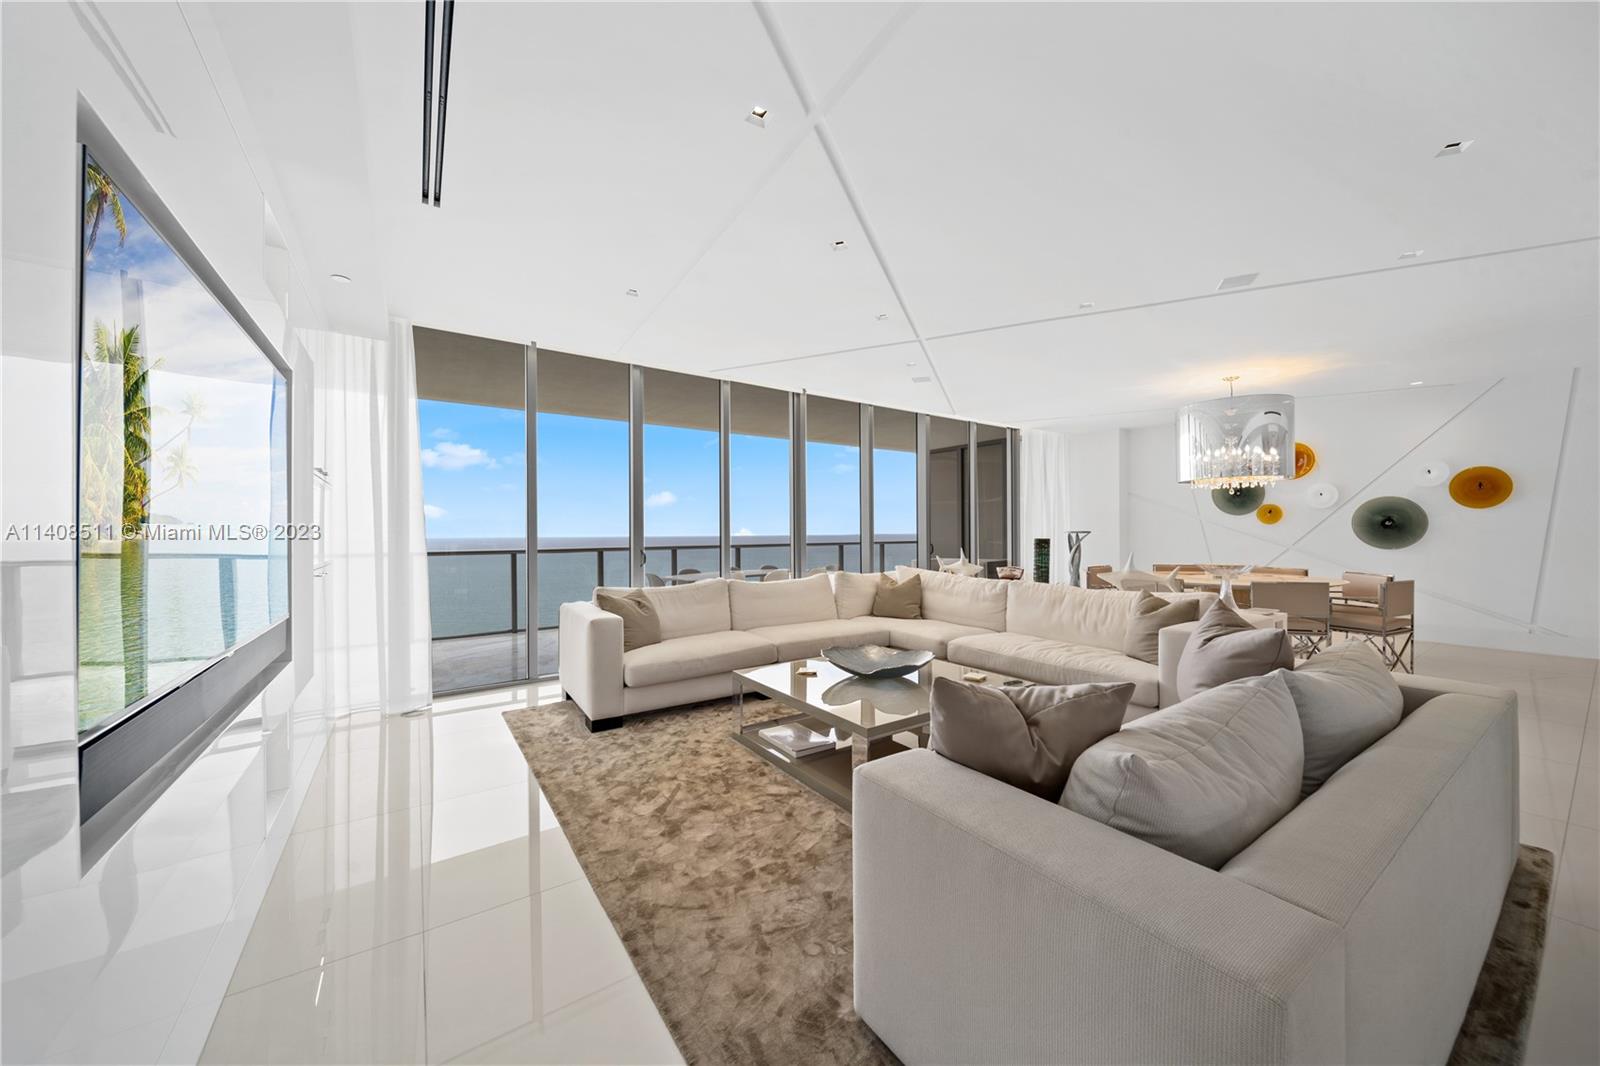 Just reduced! Unique turn-key unit at St. Regis Bal Harbour. True 4 bedroom and 4.5 bath unit, that is rarely available on the market. Designer furnished and decorated with numerous upgrades: automatic blinds and lights in all rooms, new kitchen (not original), many built-ins, surround system and many more. The unit is in great condition, because it was rarely occupied. As an option, this unit can be sold together with a connecting unit (via balcony and elevator corridor) on the same floor right next to it. Great setup for large family (please look at St Regis 2103S MLS #A11408656). Negotiable.